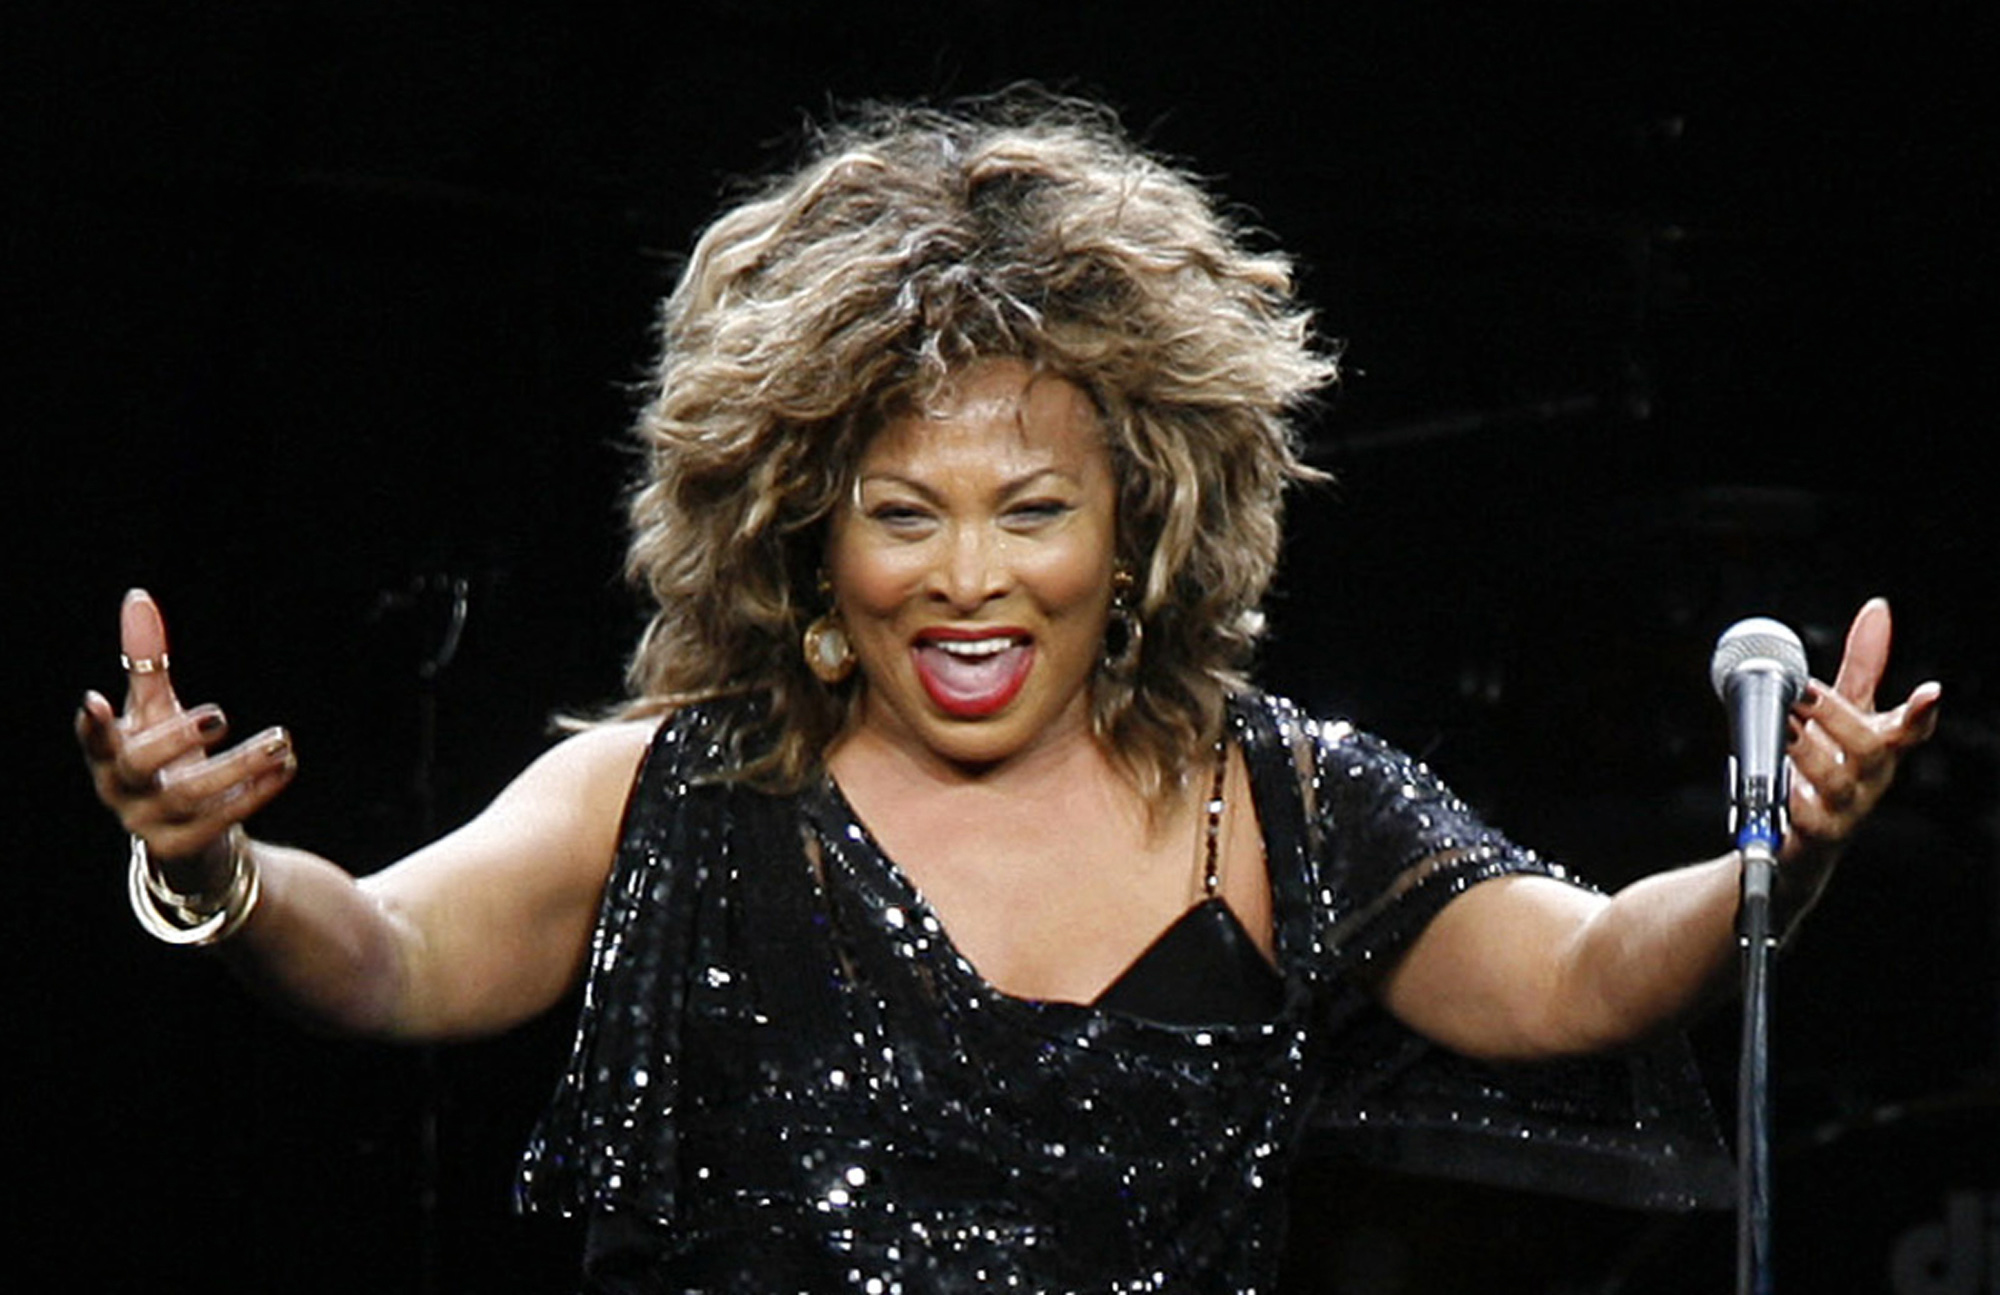 PHOTO: Tina Turner performs in a concert in Cologne, Germany on Jan. 14, 2009.